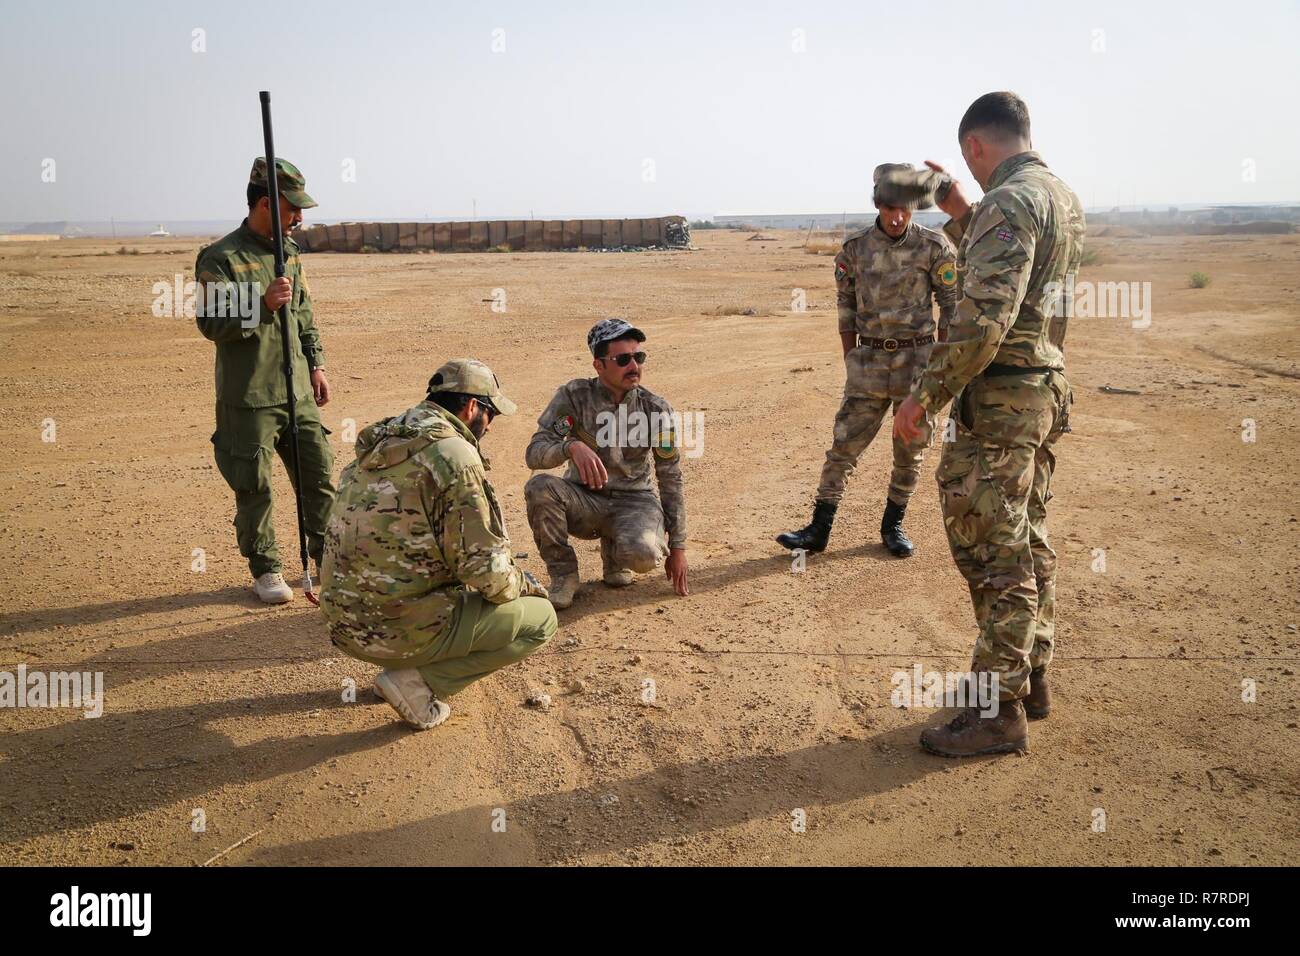 A British trainer, deployed in support of Combined Joint Task Force – Operation Inherent Resolve, explains to Iraqi security forces soldiers how to detect an improvised explosive device on a patrol during counter-IED training at Al Asad Air Base, Iraq, March 29, 2017. This training is part of the overall CJTF- OIR building partner capacity mission by training and improving the capability of partnered forces fighting ISIS. CJTF- OIR is the global Coalition to defeat ISIS in Iraq and Syria. Stock Photo